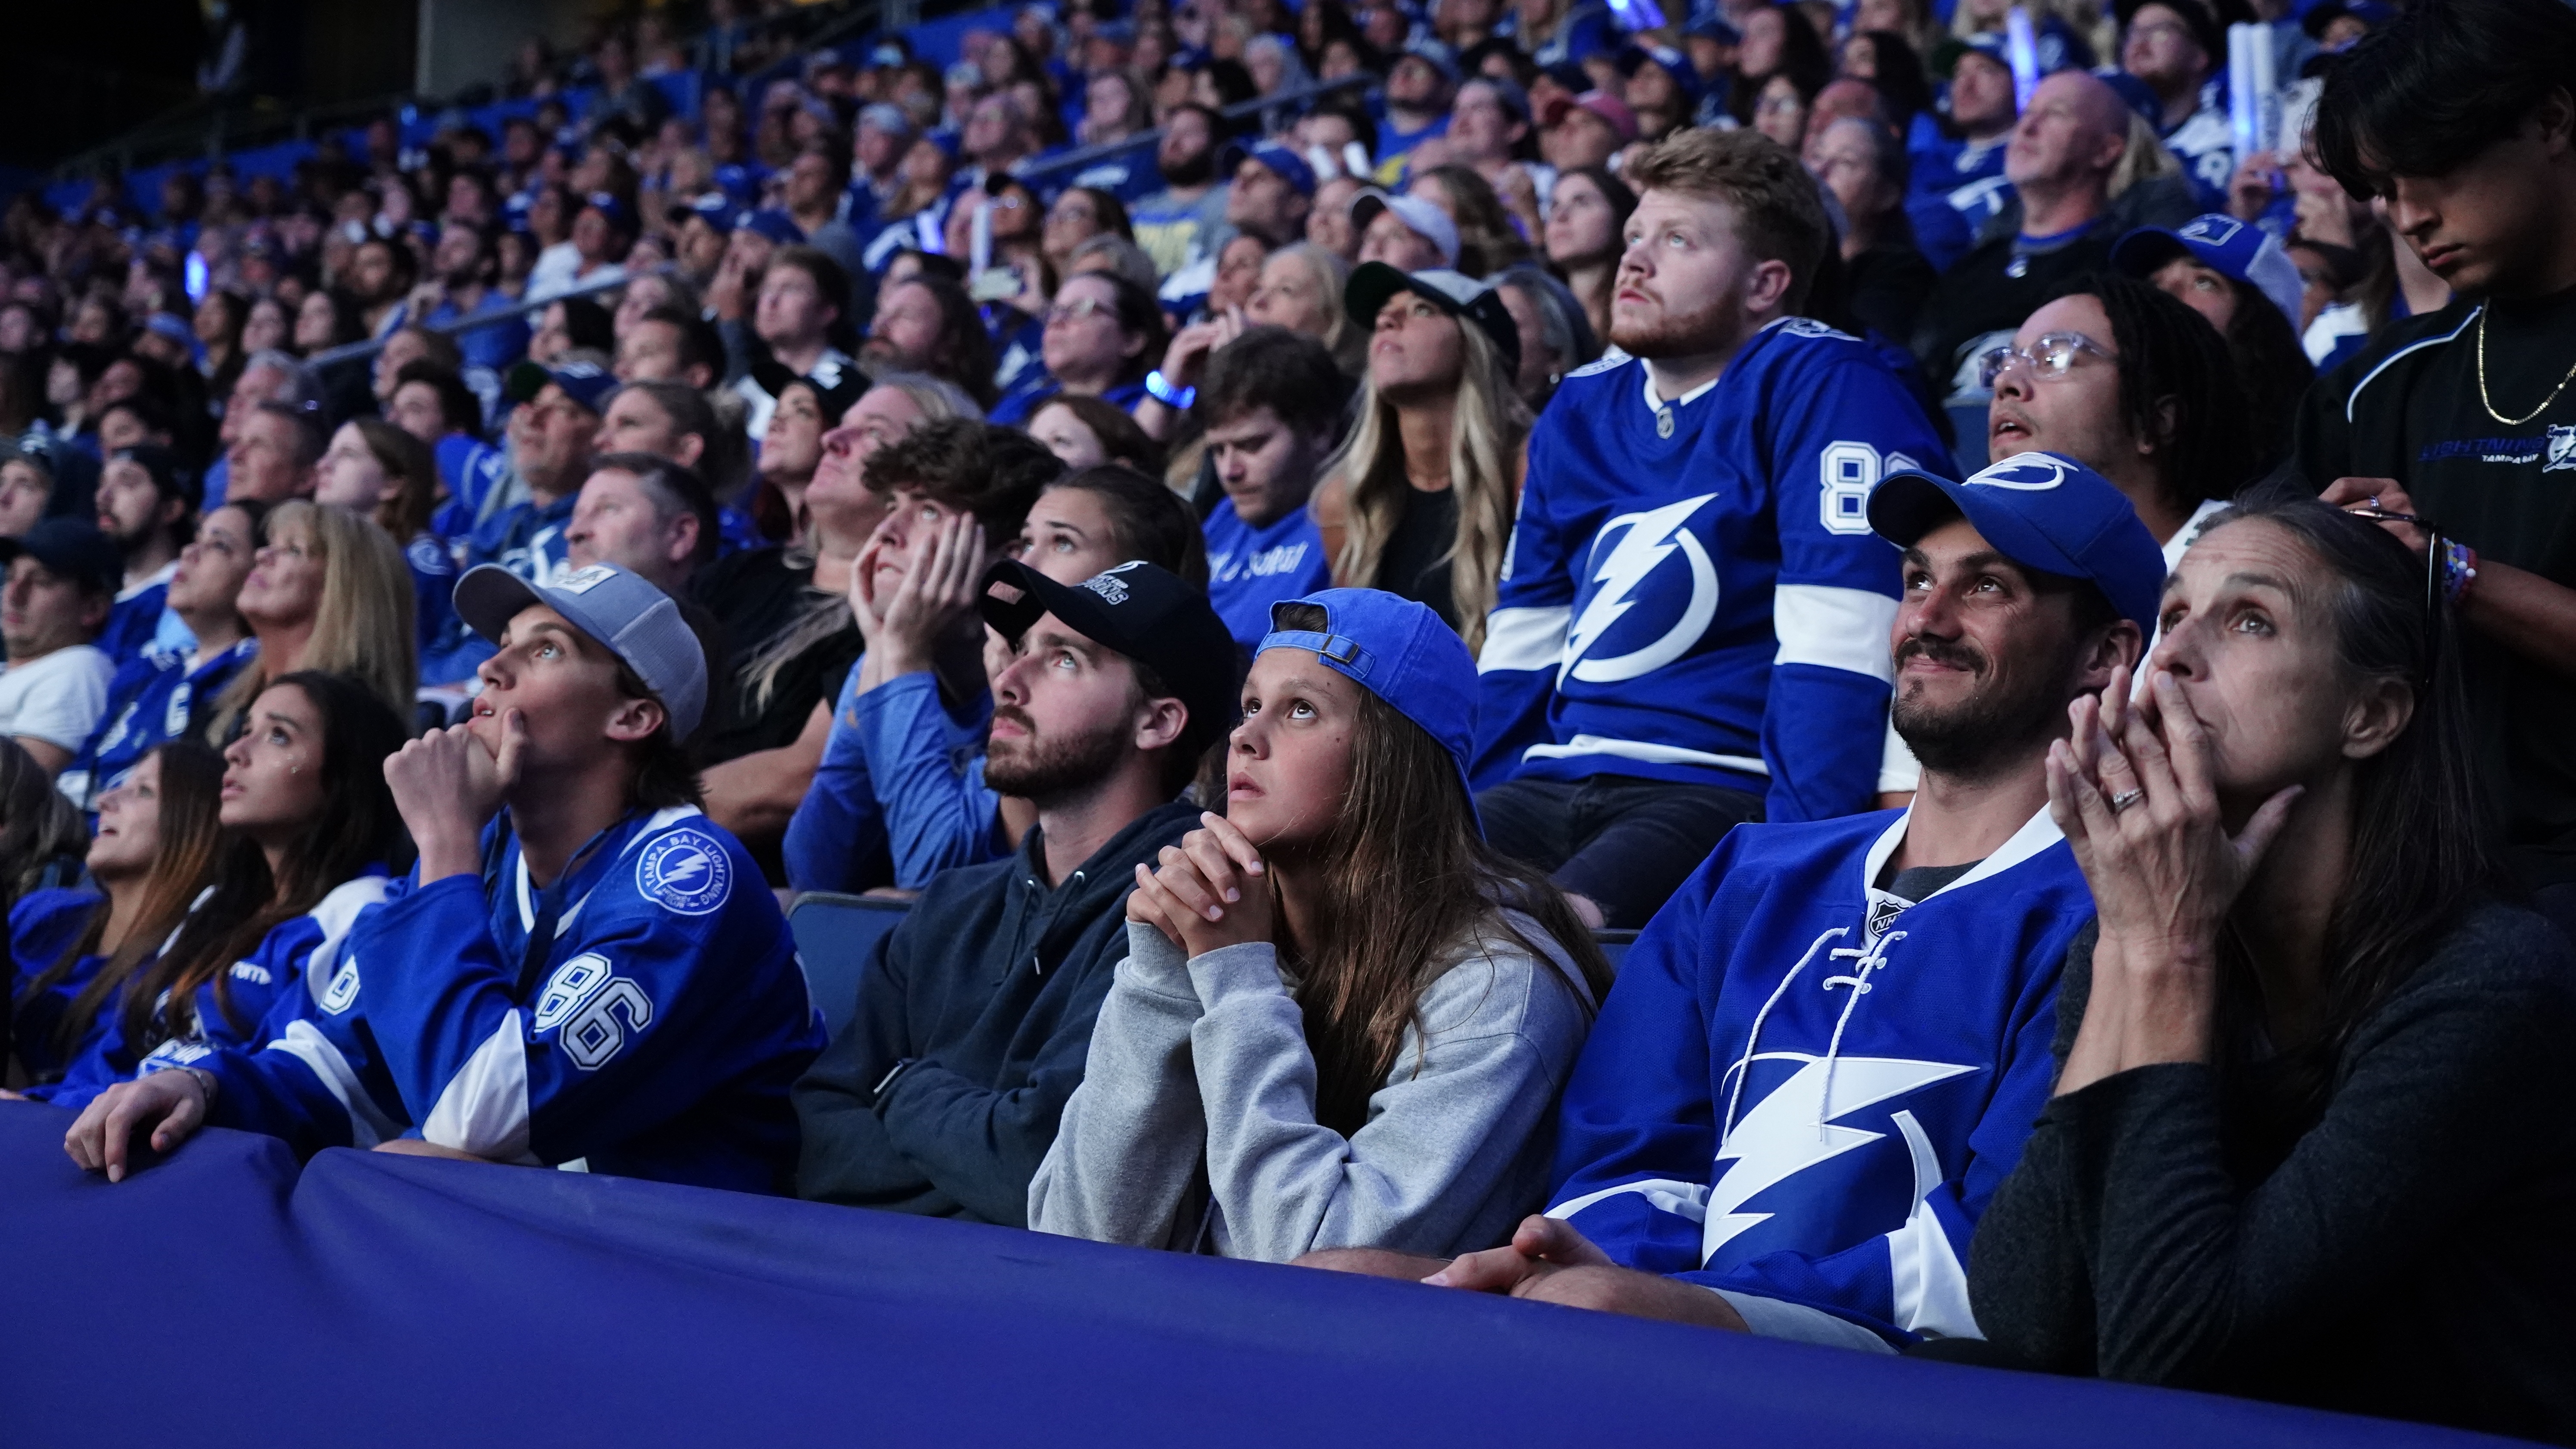 Lightning watch party held tonight at Amalie Arena